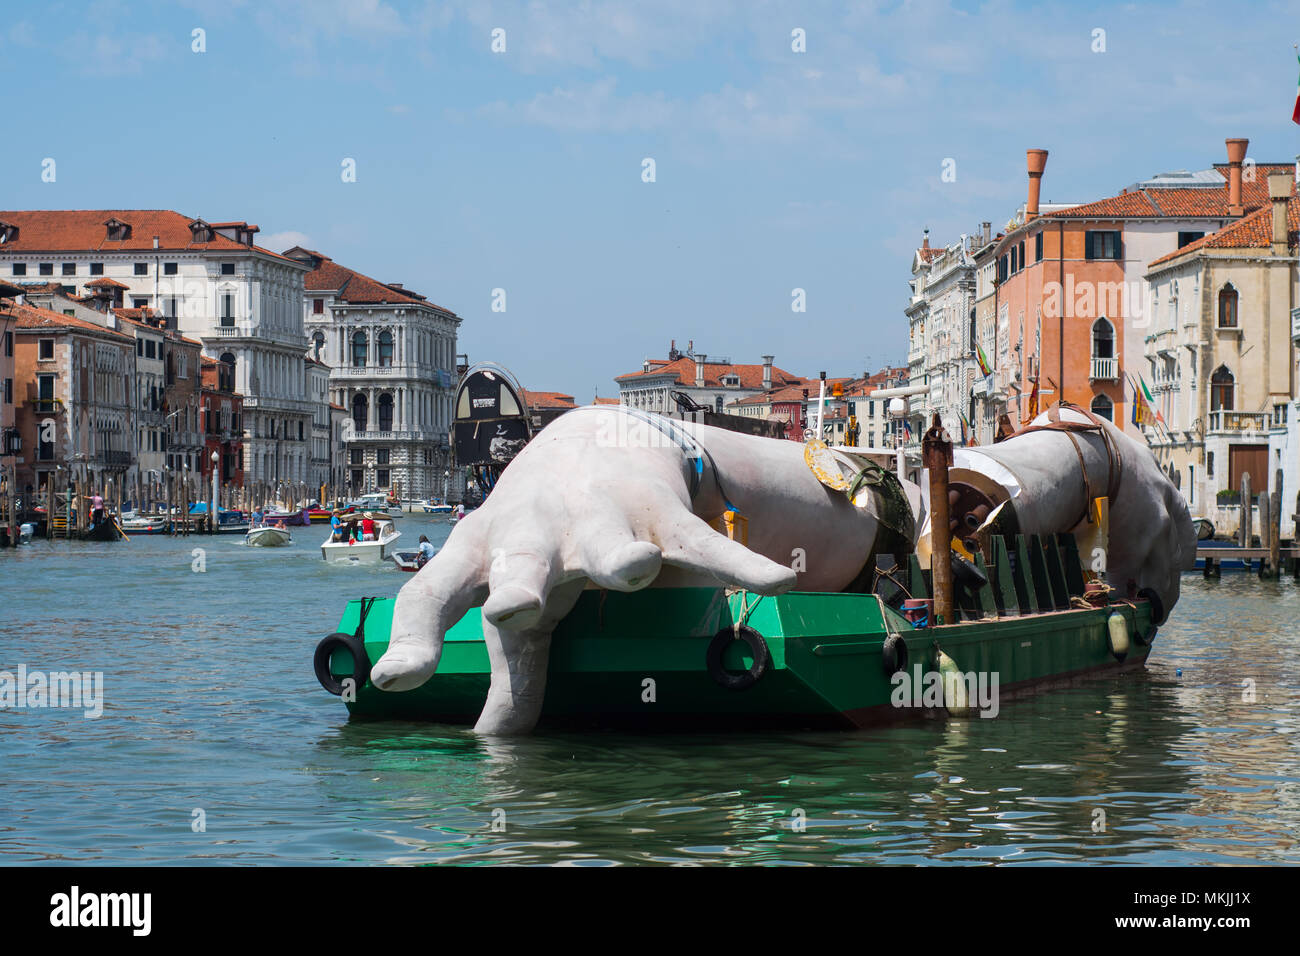 VENICE, ITALY. 08 MAY, 2018. One hand of the work of Lorenzo Quinn is disassembled and placed on a large barge for transport in Venice, Italy on 5 May 2018. The work of the artist Lorenzo Quinn 'Support', known as the 'big hands that support Venice', leave the Grand Canal to return to the artist's studio in Spain. © Simone Padovani / Awakening Stock Photo